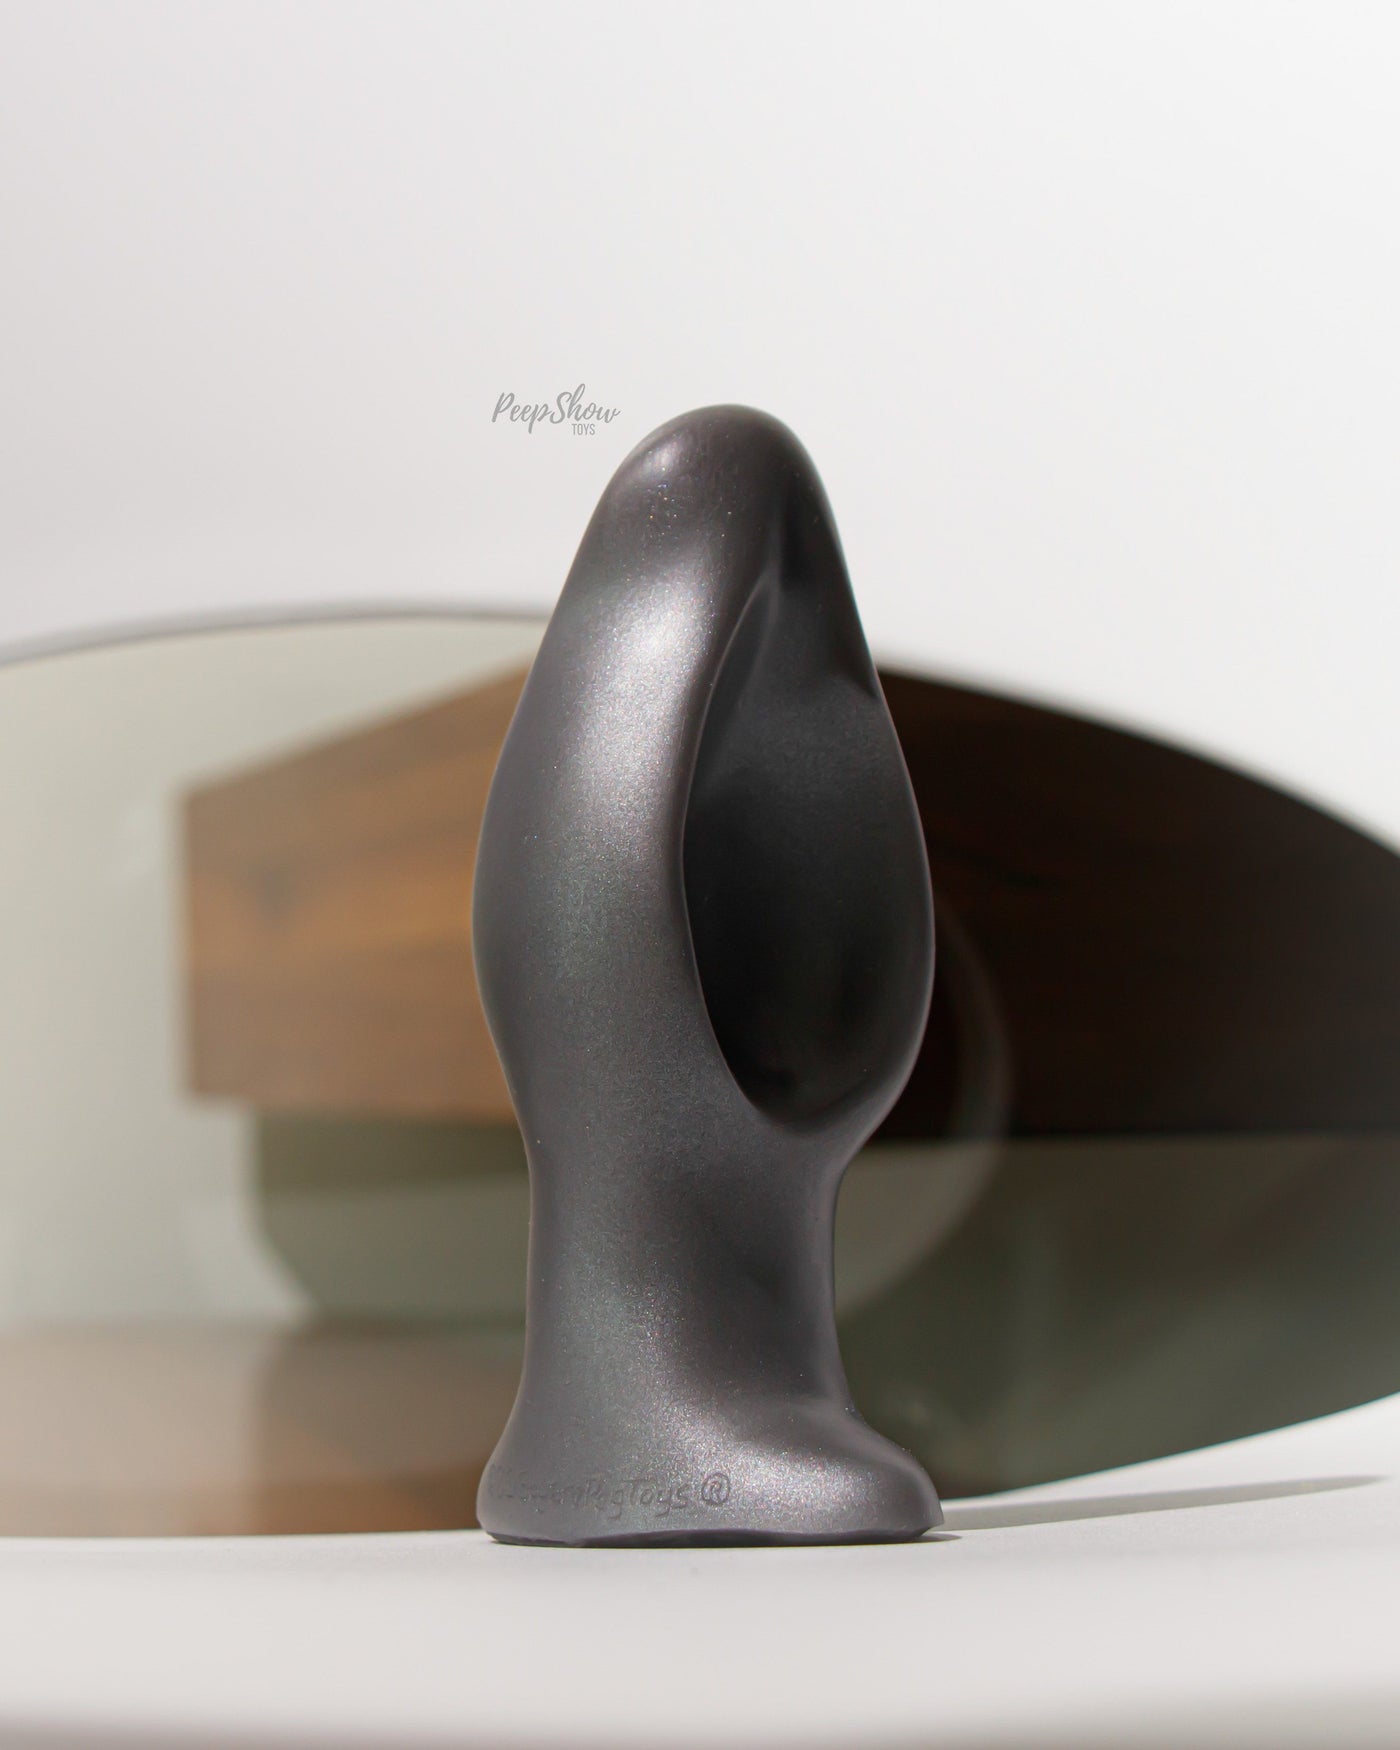 G squeeze™ Vaginal Plug by SquarePegToys® - SuperSoft Silicone, 4 Sizes - Large Graphite side view